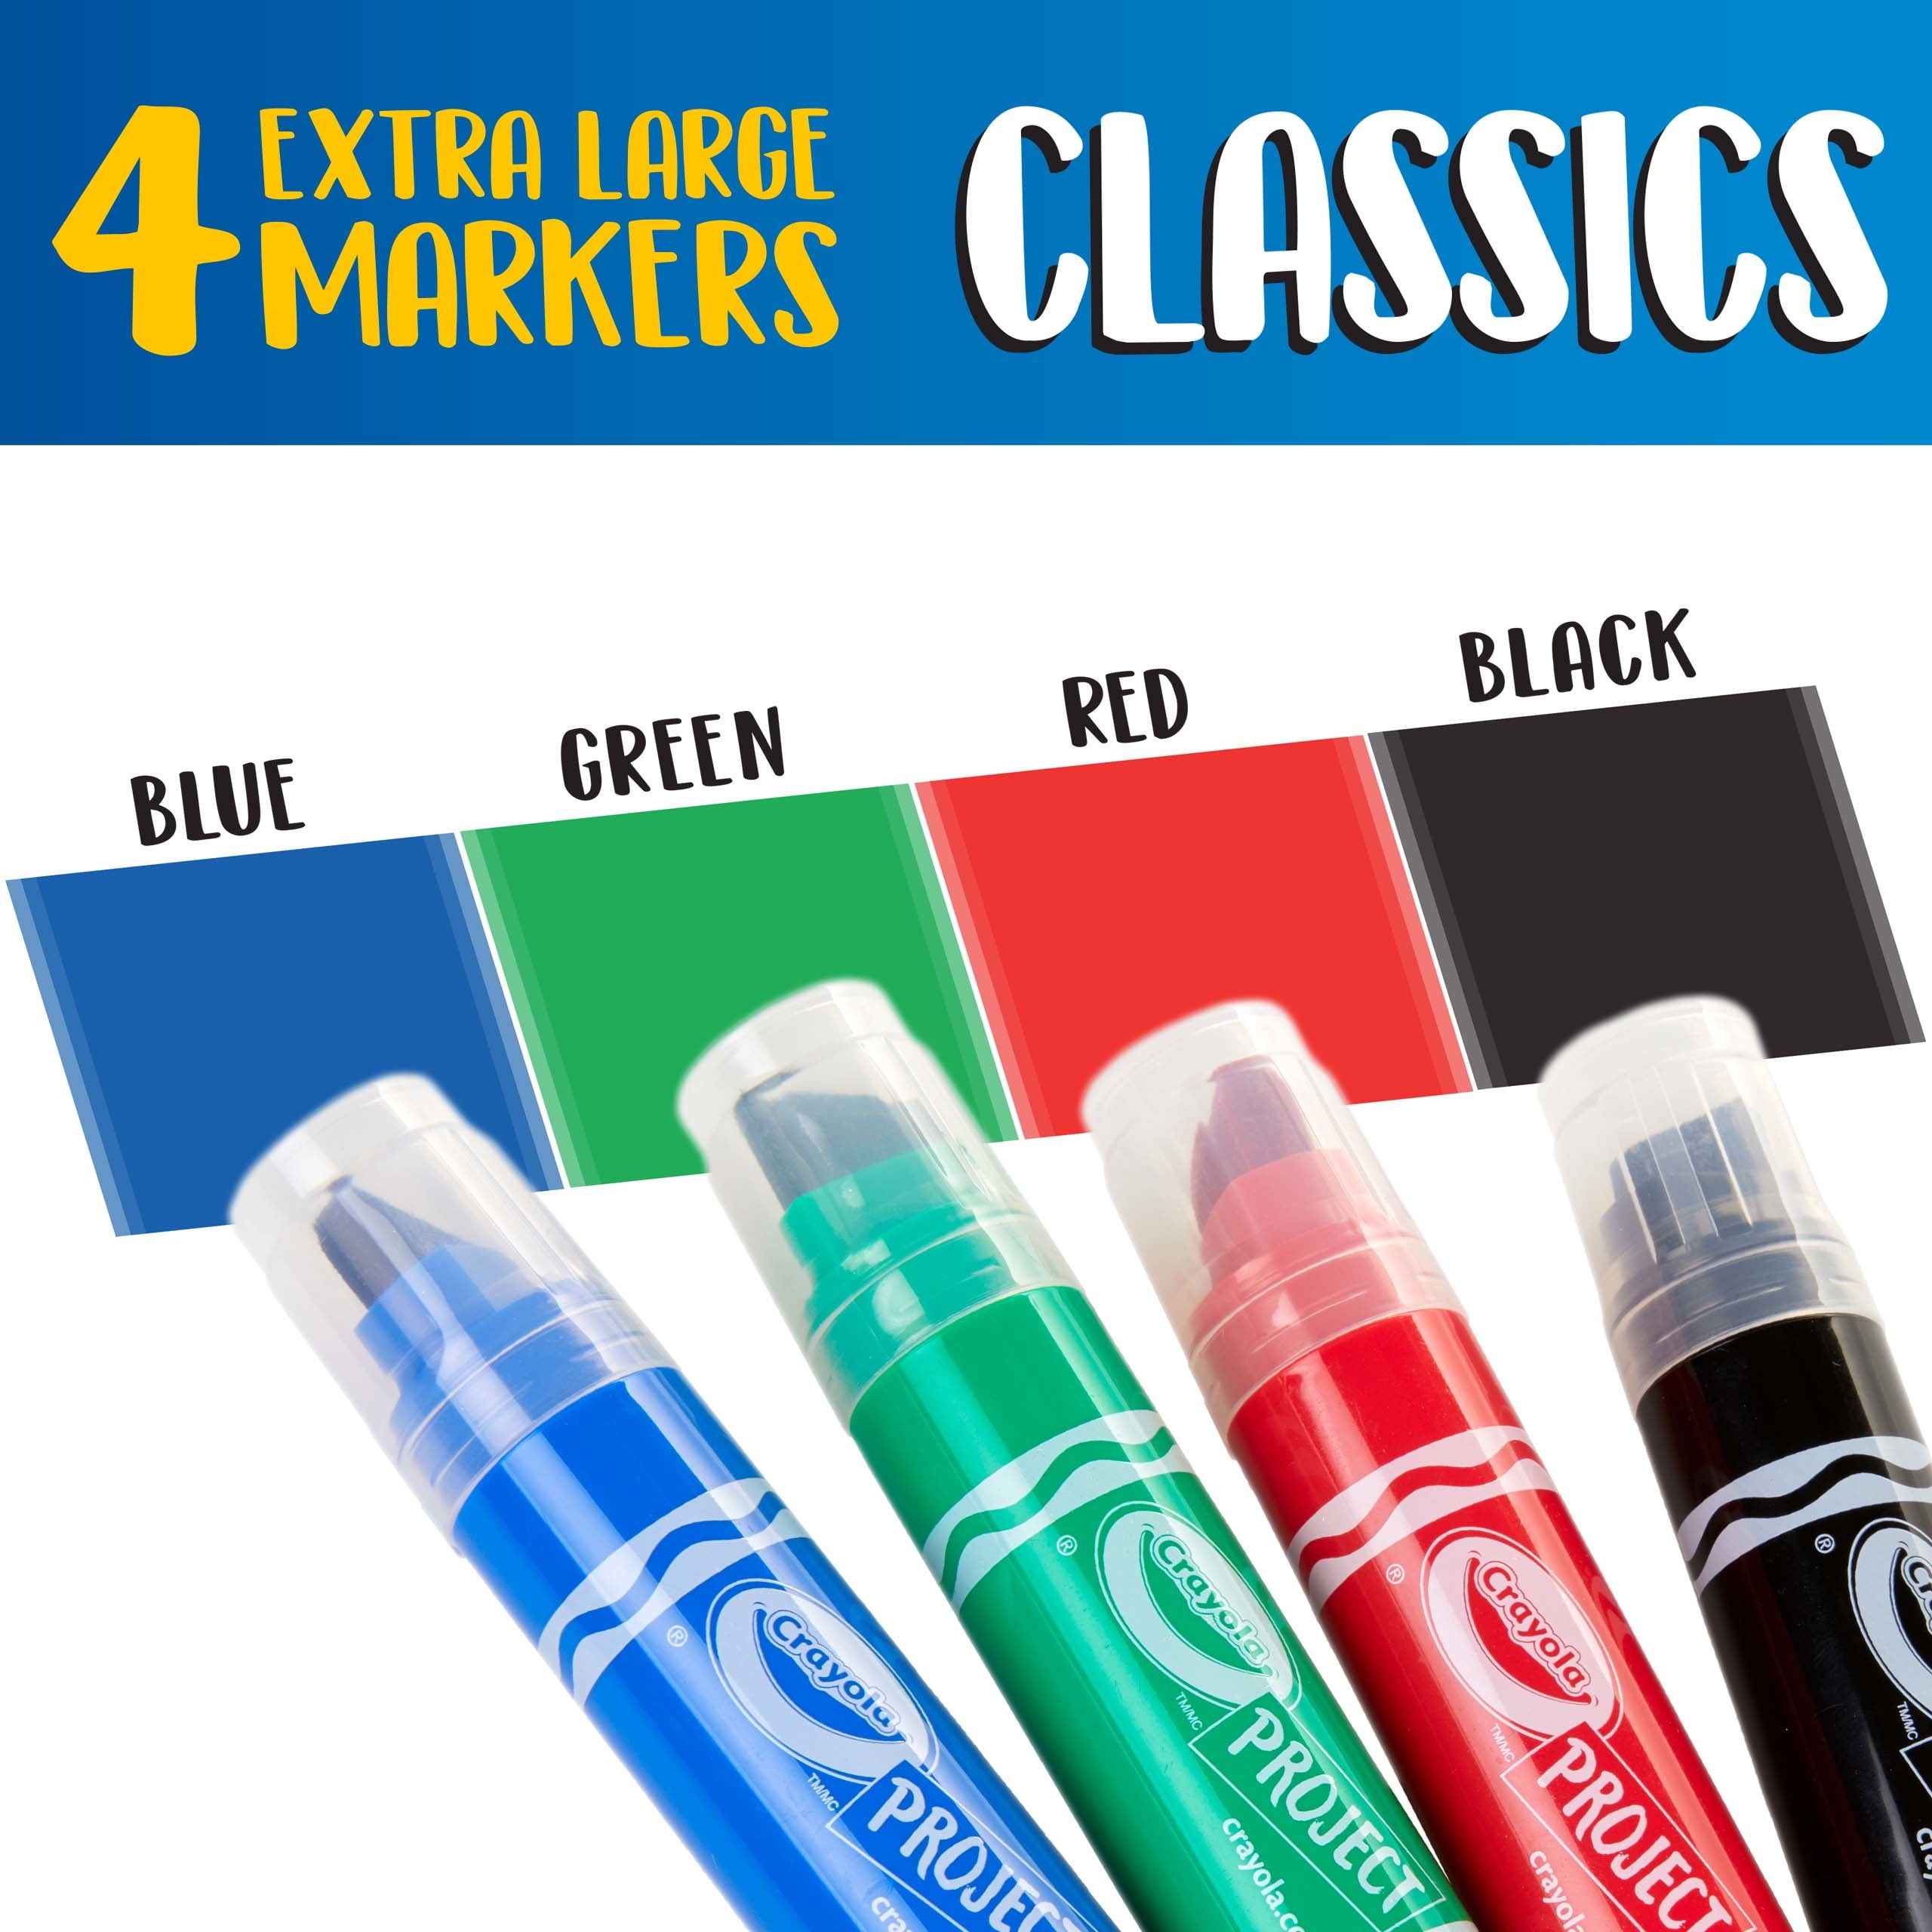 Crayola® Project Erasable Poster Markers